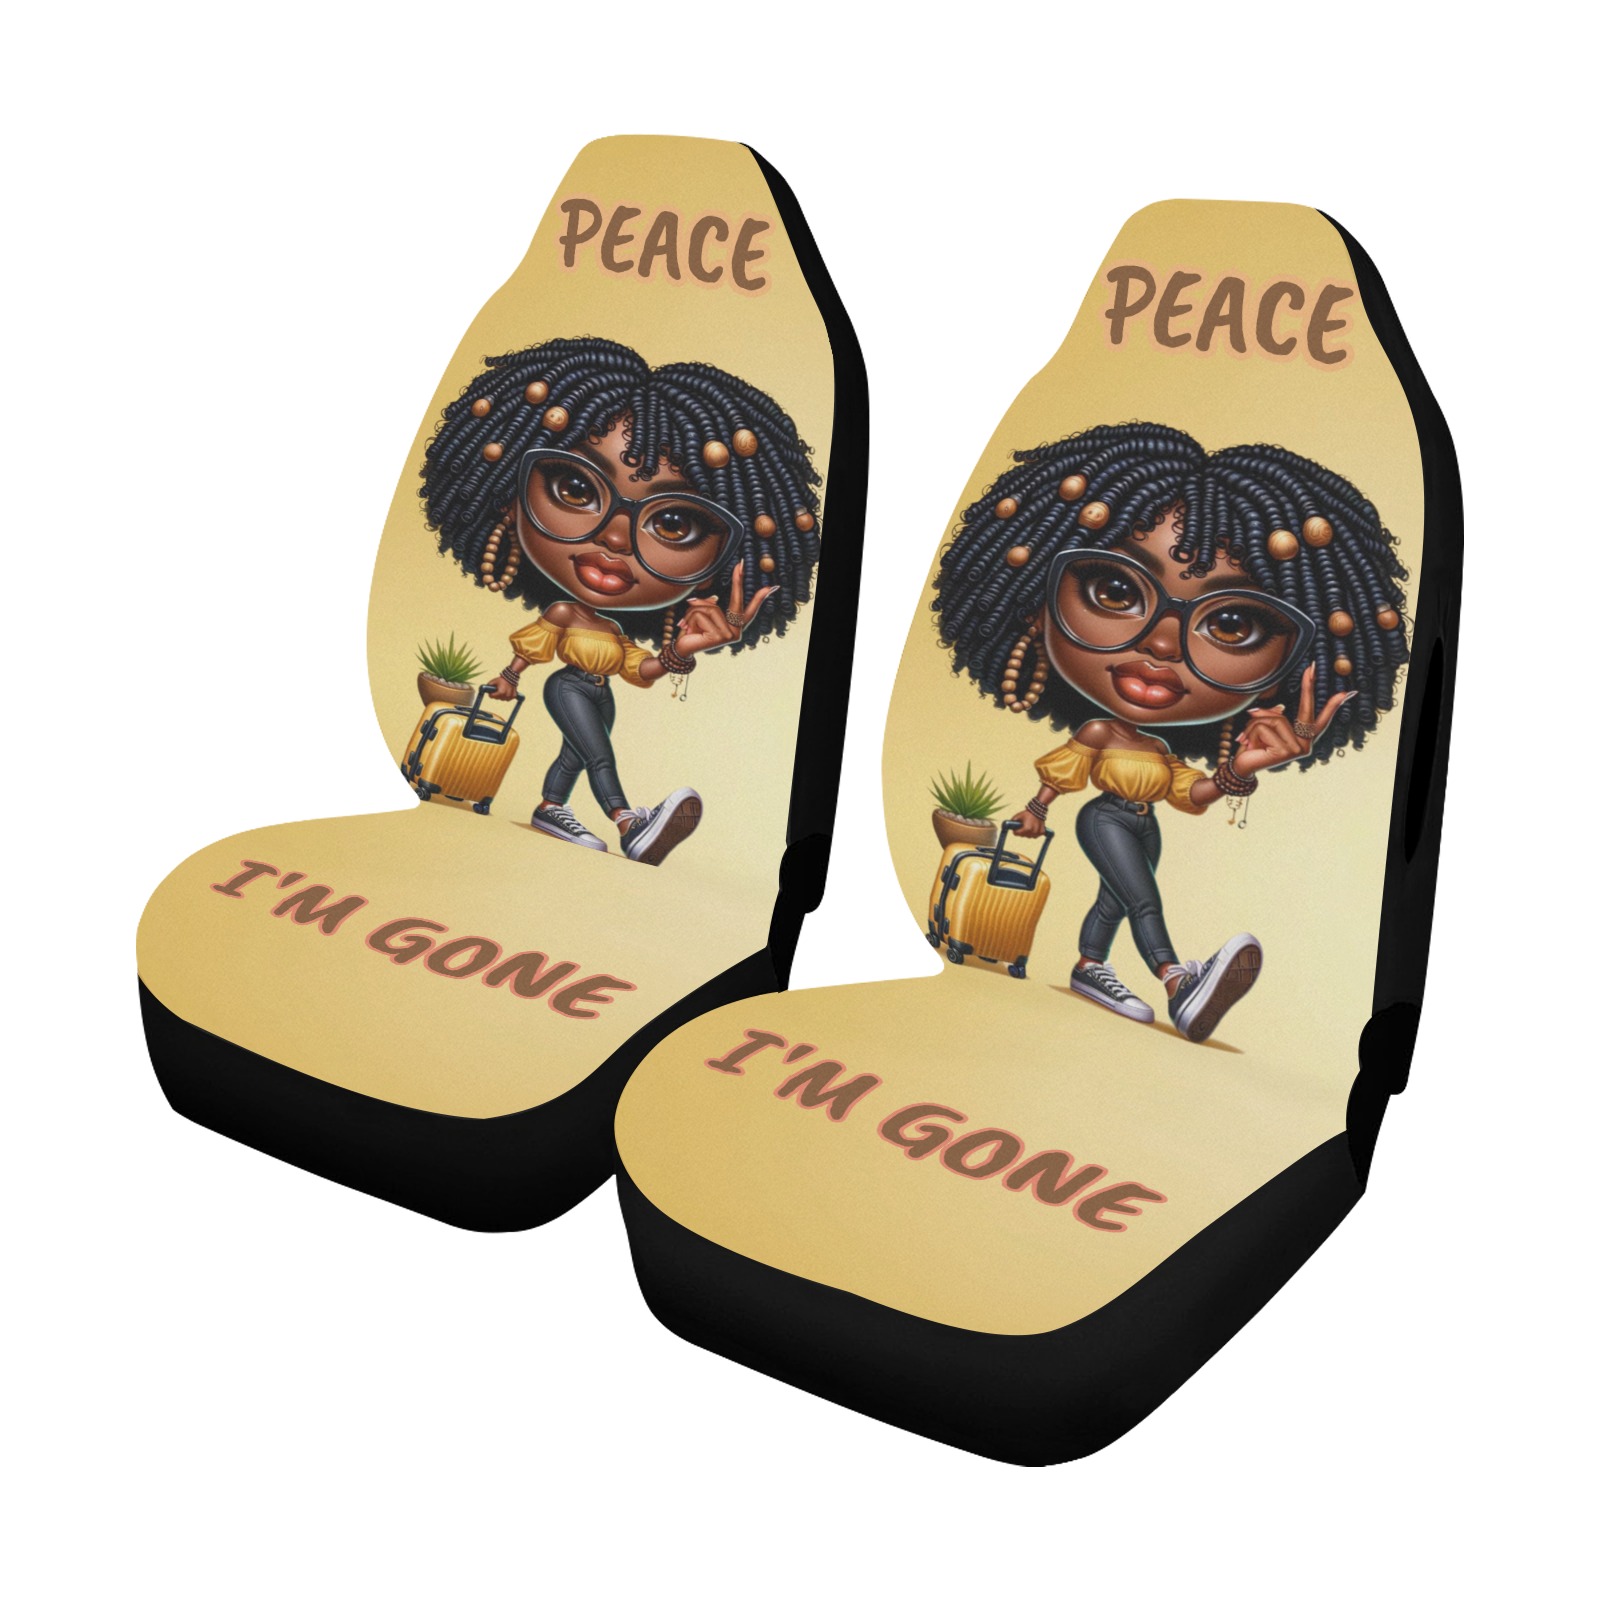 "PEACE! I'M GONE" Carseat Cover Car Seat Cover Airbag Compatible (Set of 2)